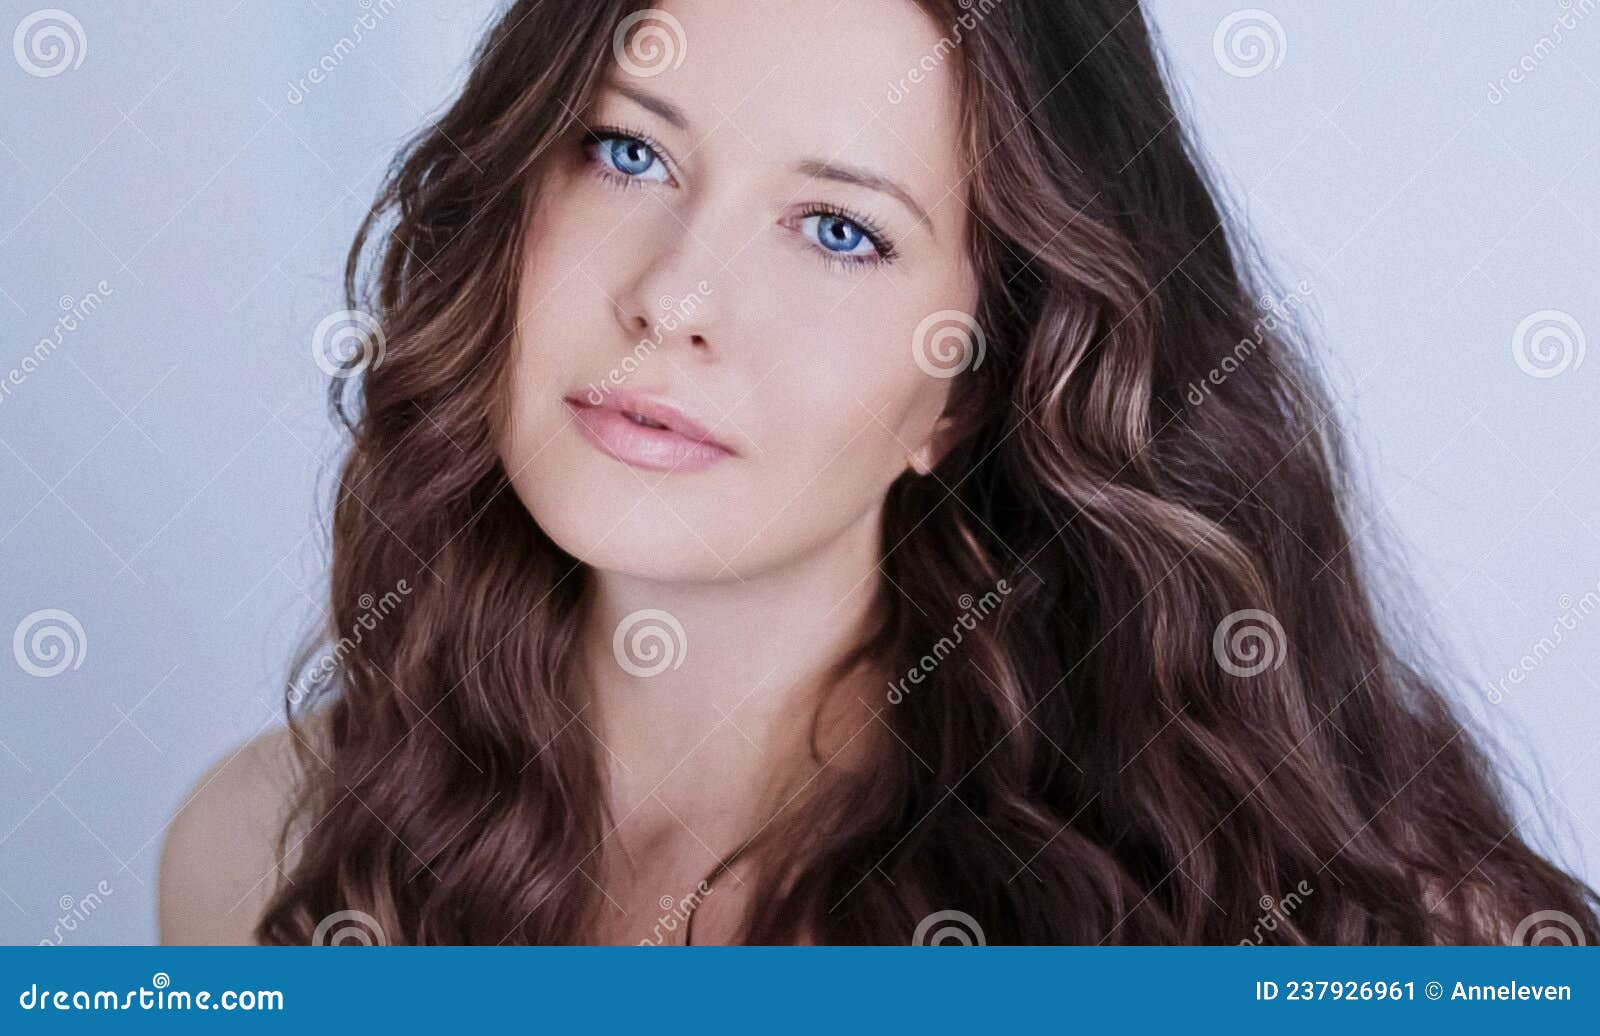 9. "Blue-eyed beauty with dark curly hair" - wide 3